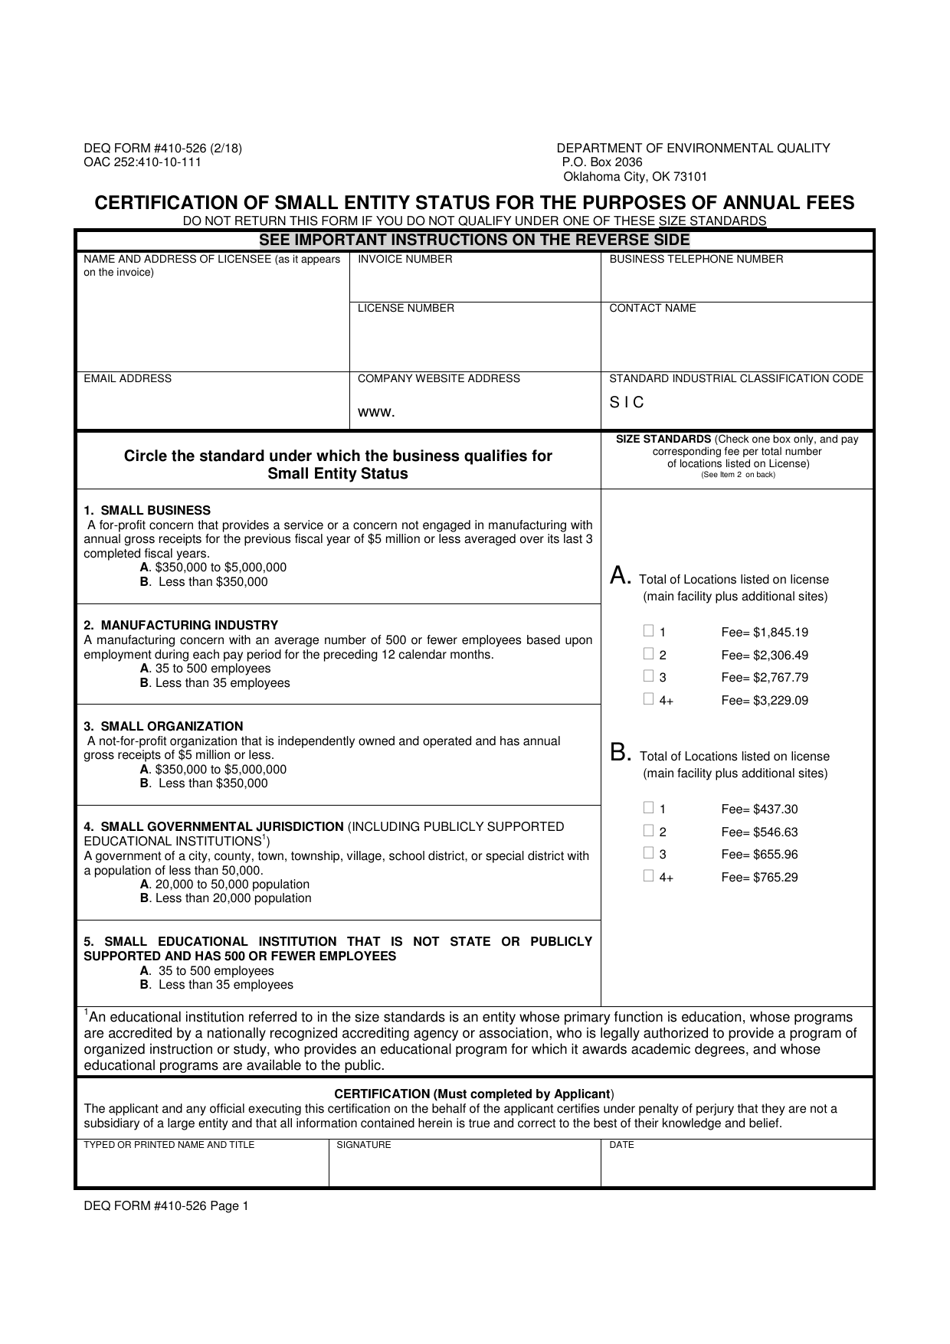 DEQ Form 410-526 Certification of Small Entity Status for the Purposes of Annual Fees - Oklahoma, Page 1